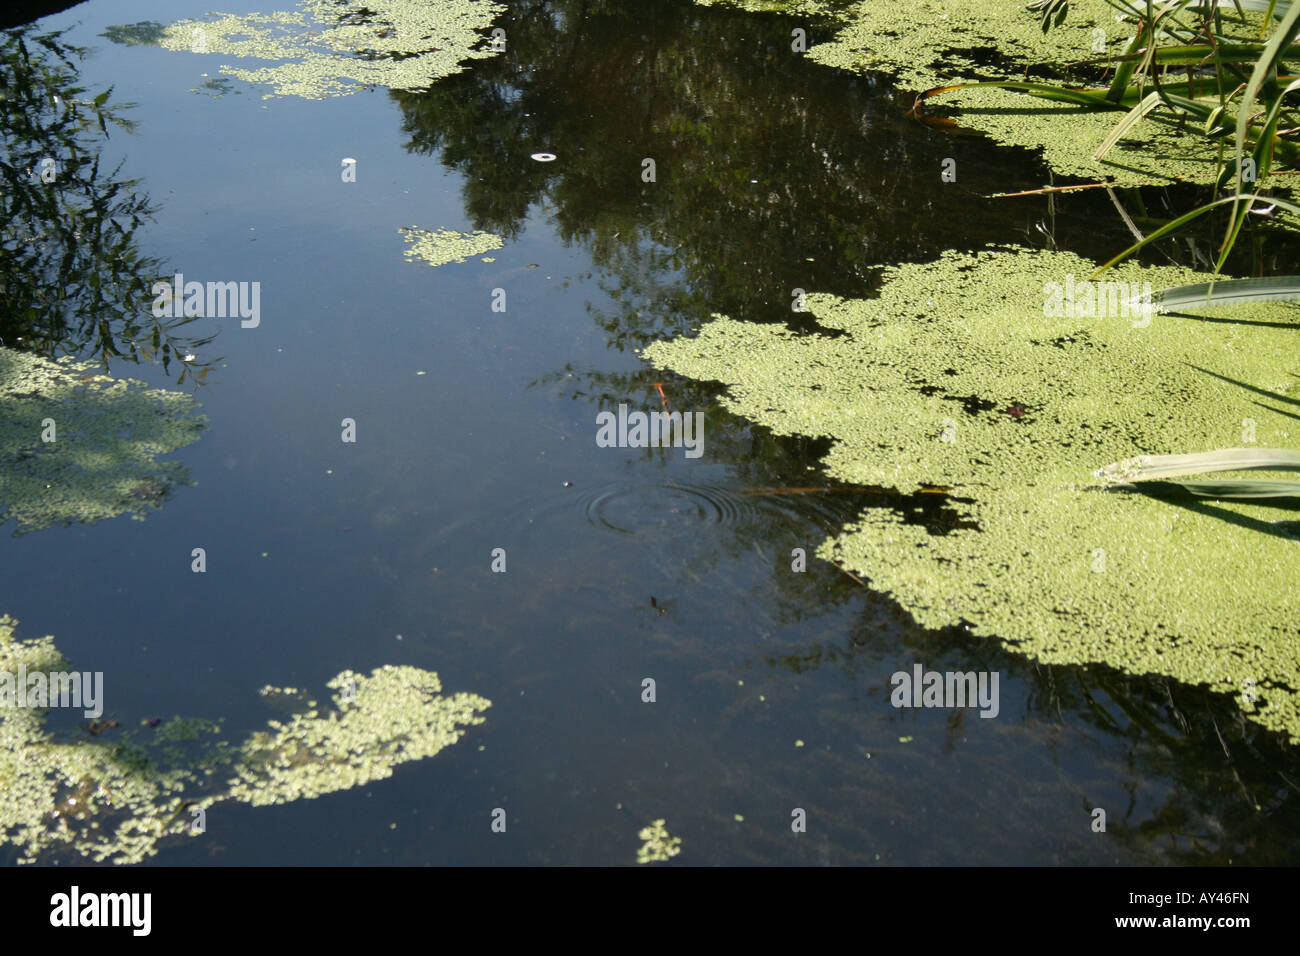 The surface of a pond showing weed, water, plants and reflections. Taken in The Rock Gardens,Southsea, UK, on a sunny day. Stock Photo